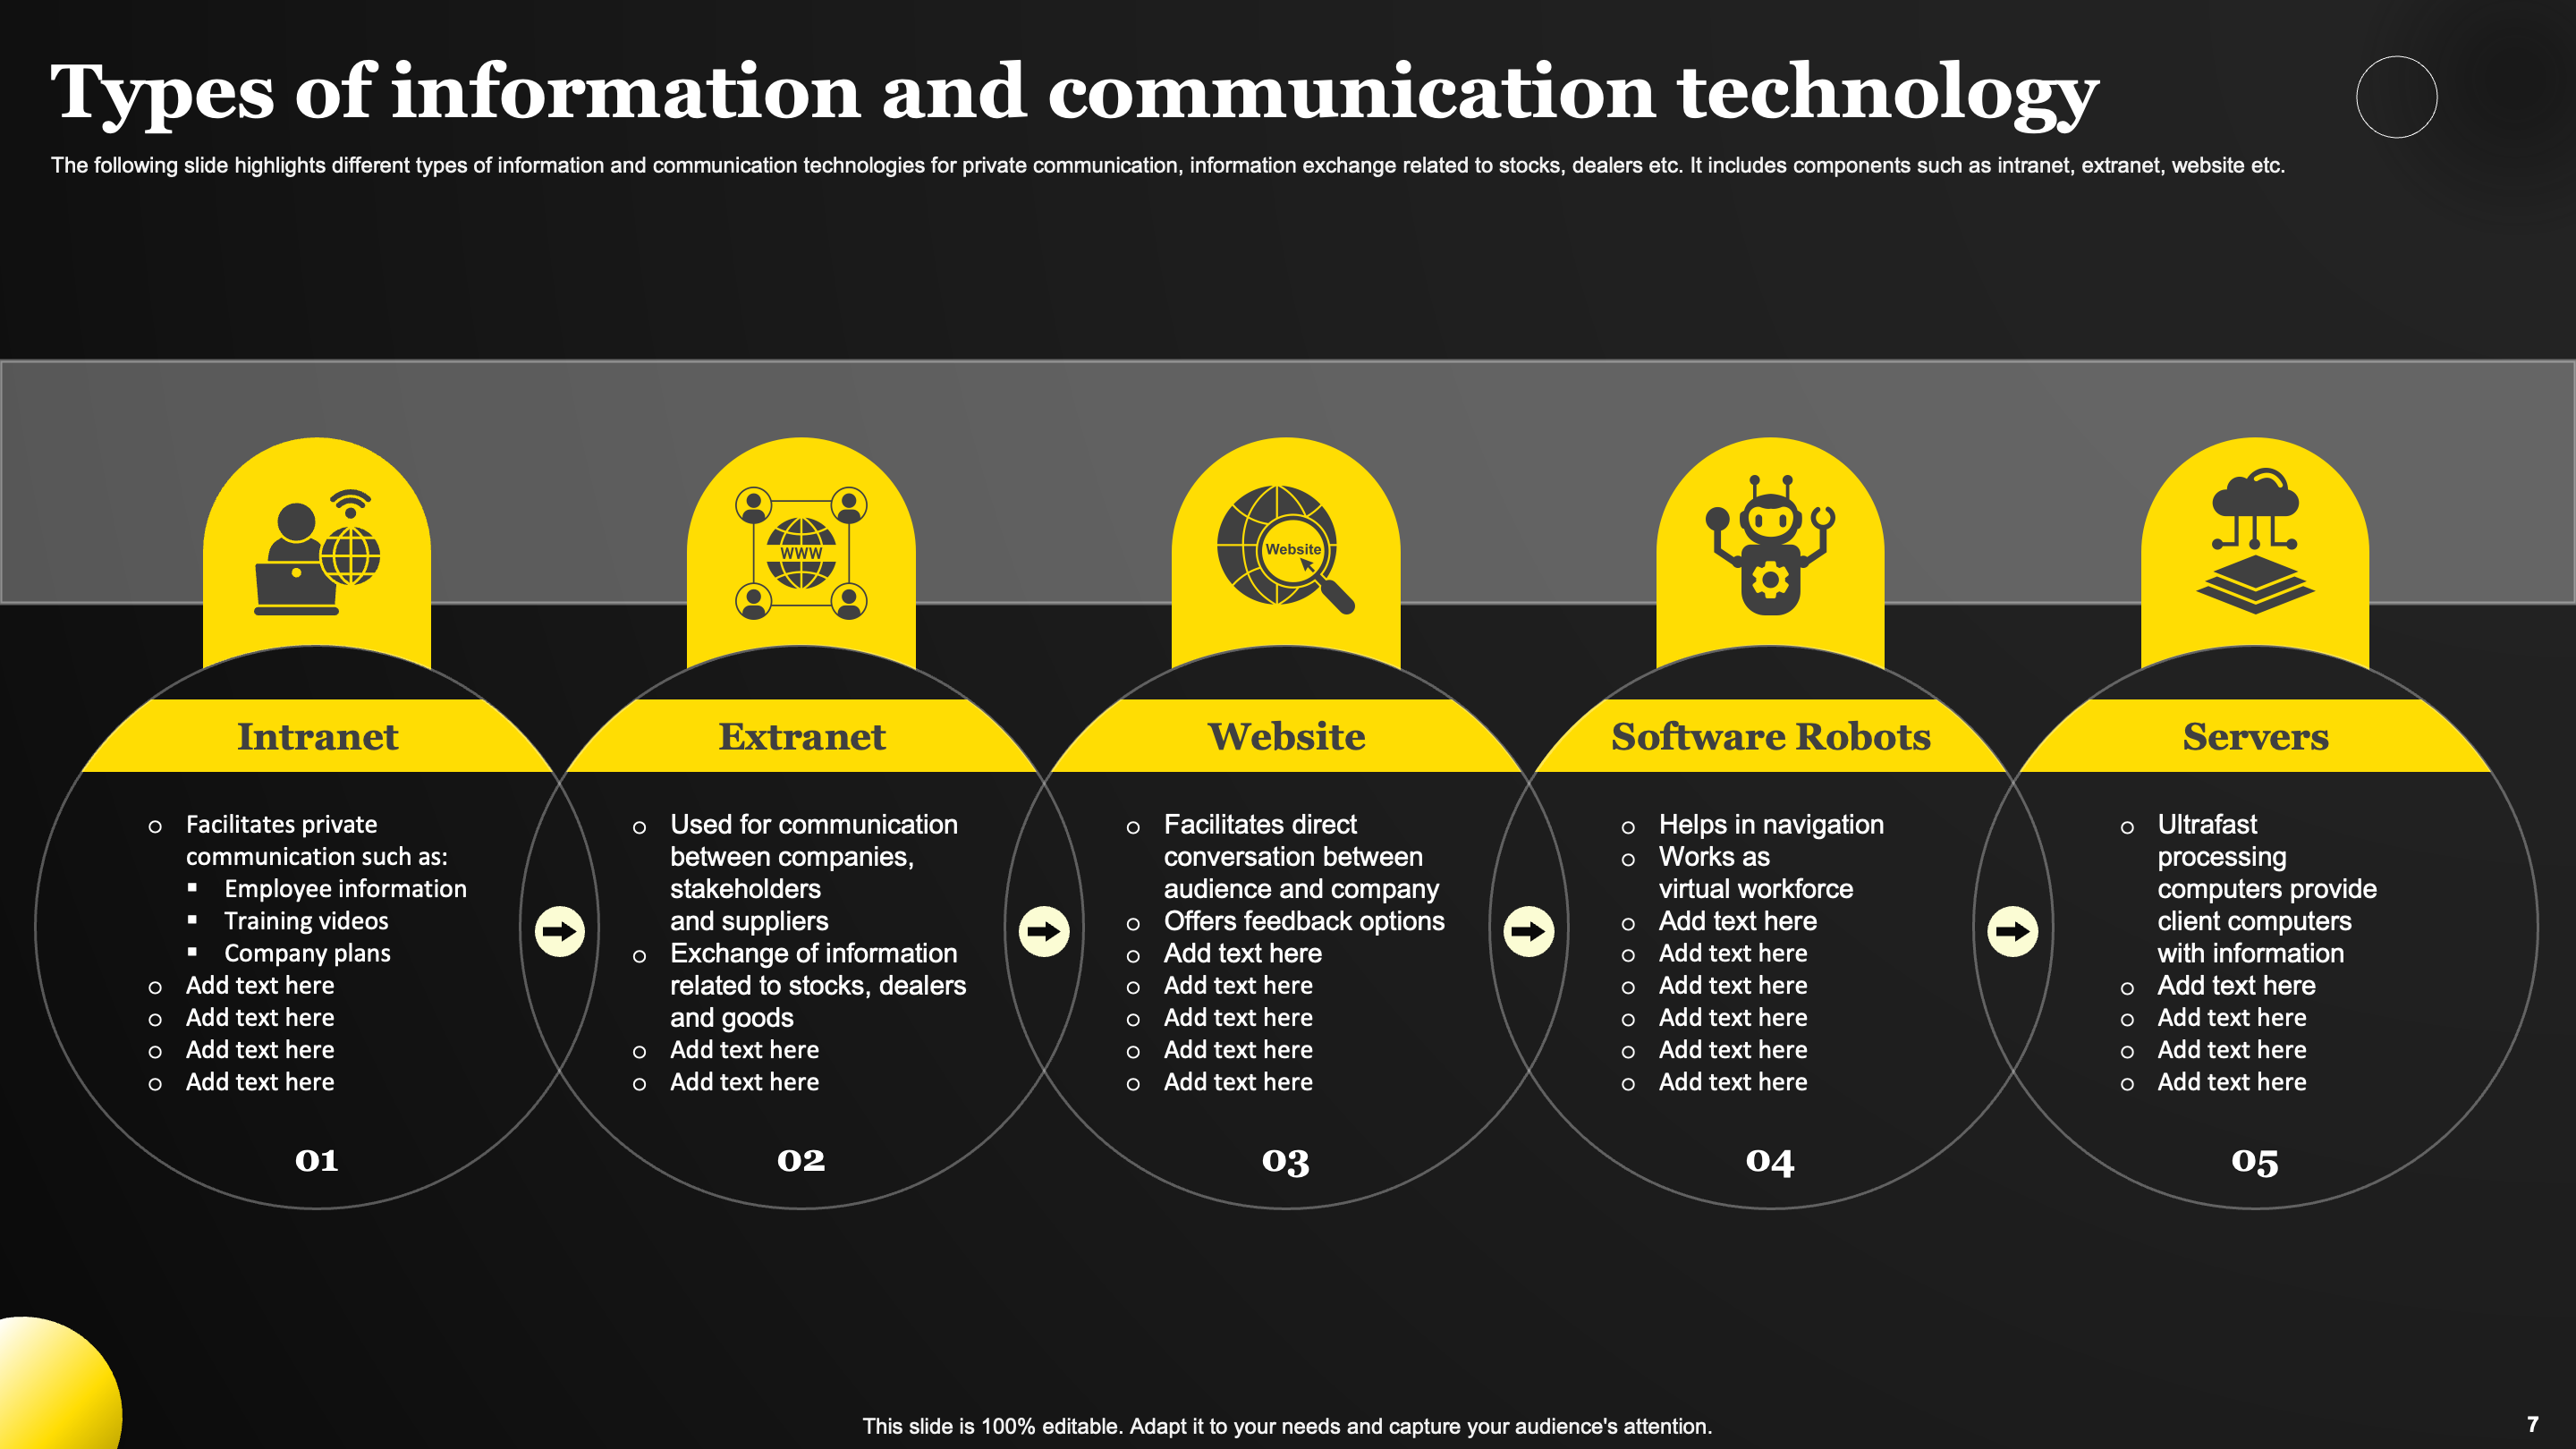 Types of Information and Communication Technology